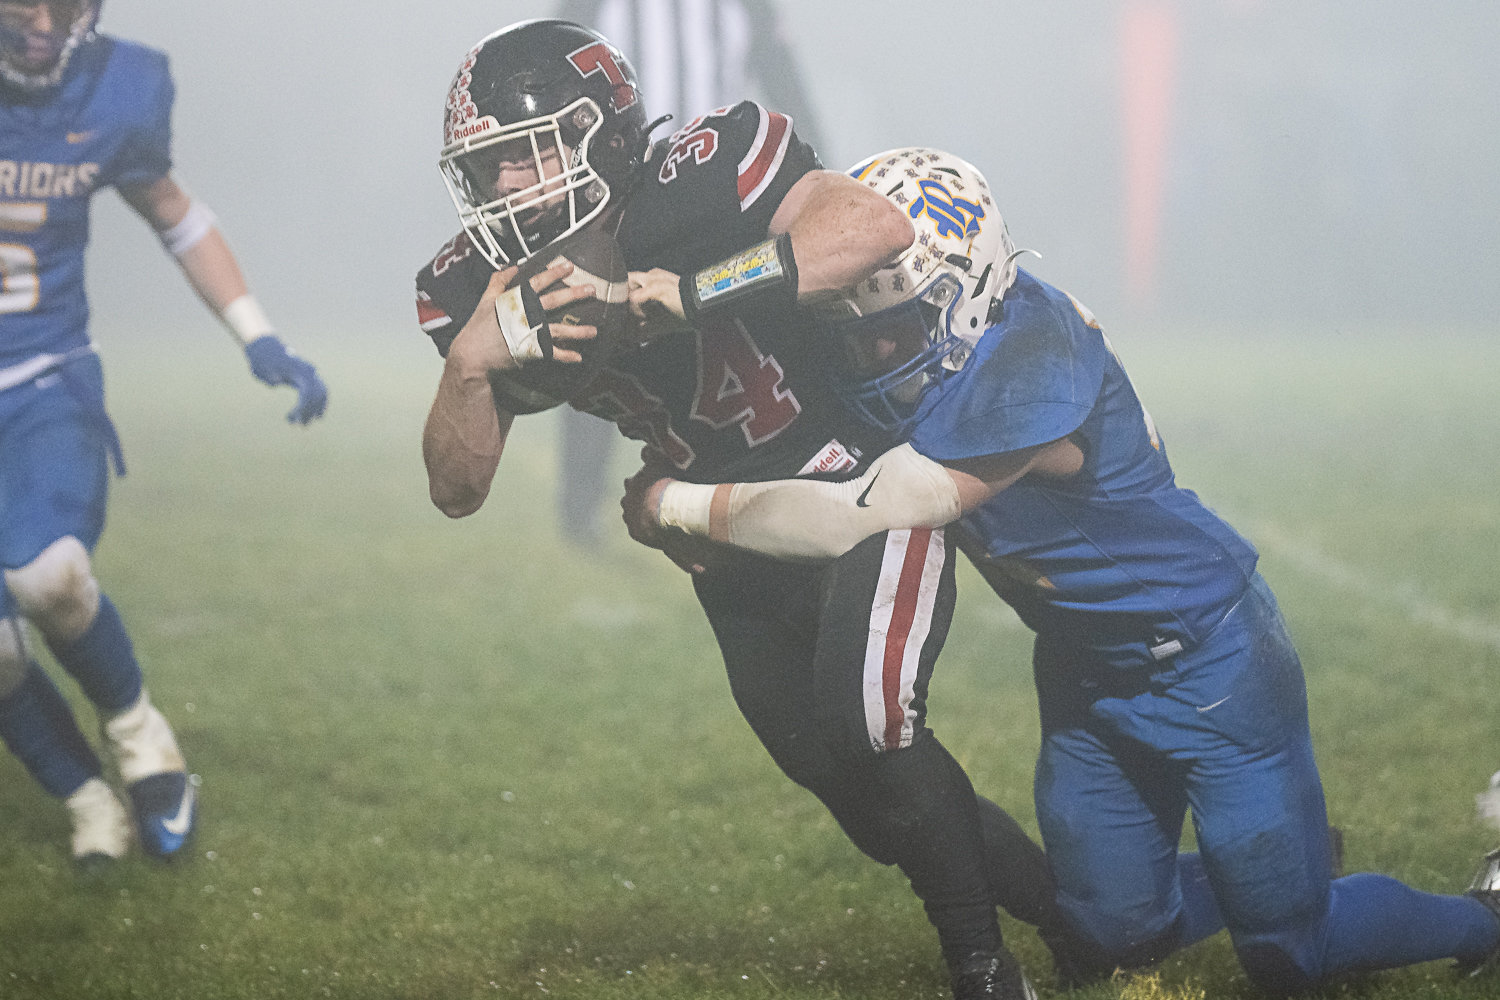 Tenino's Randy Marti blows through a tackler against Rochester in the Scatter Creek Showdown Oct. 28.